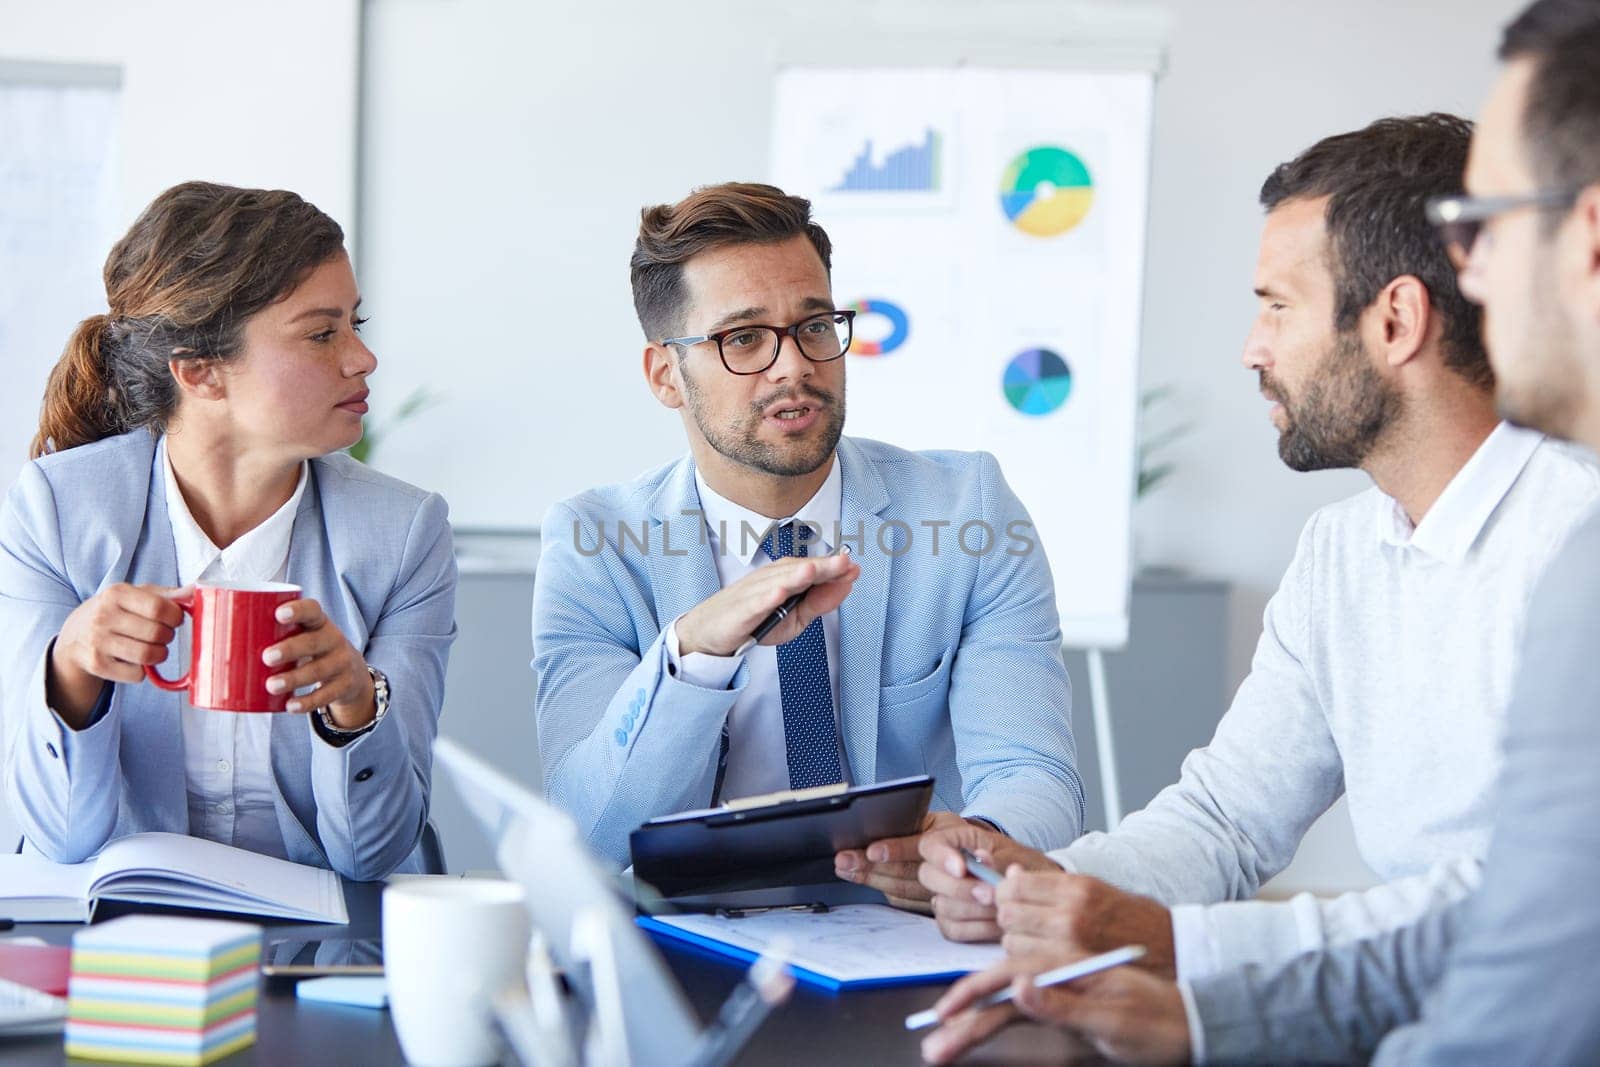 Successful businesspeople having a meeting in an office. Business concept